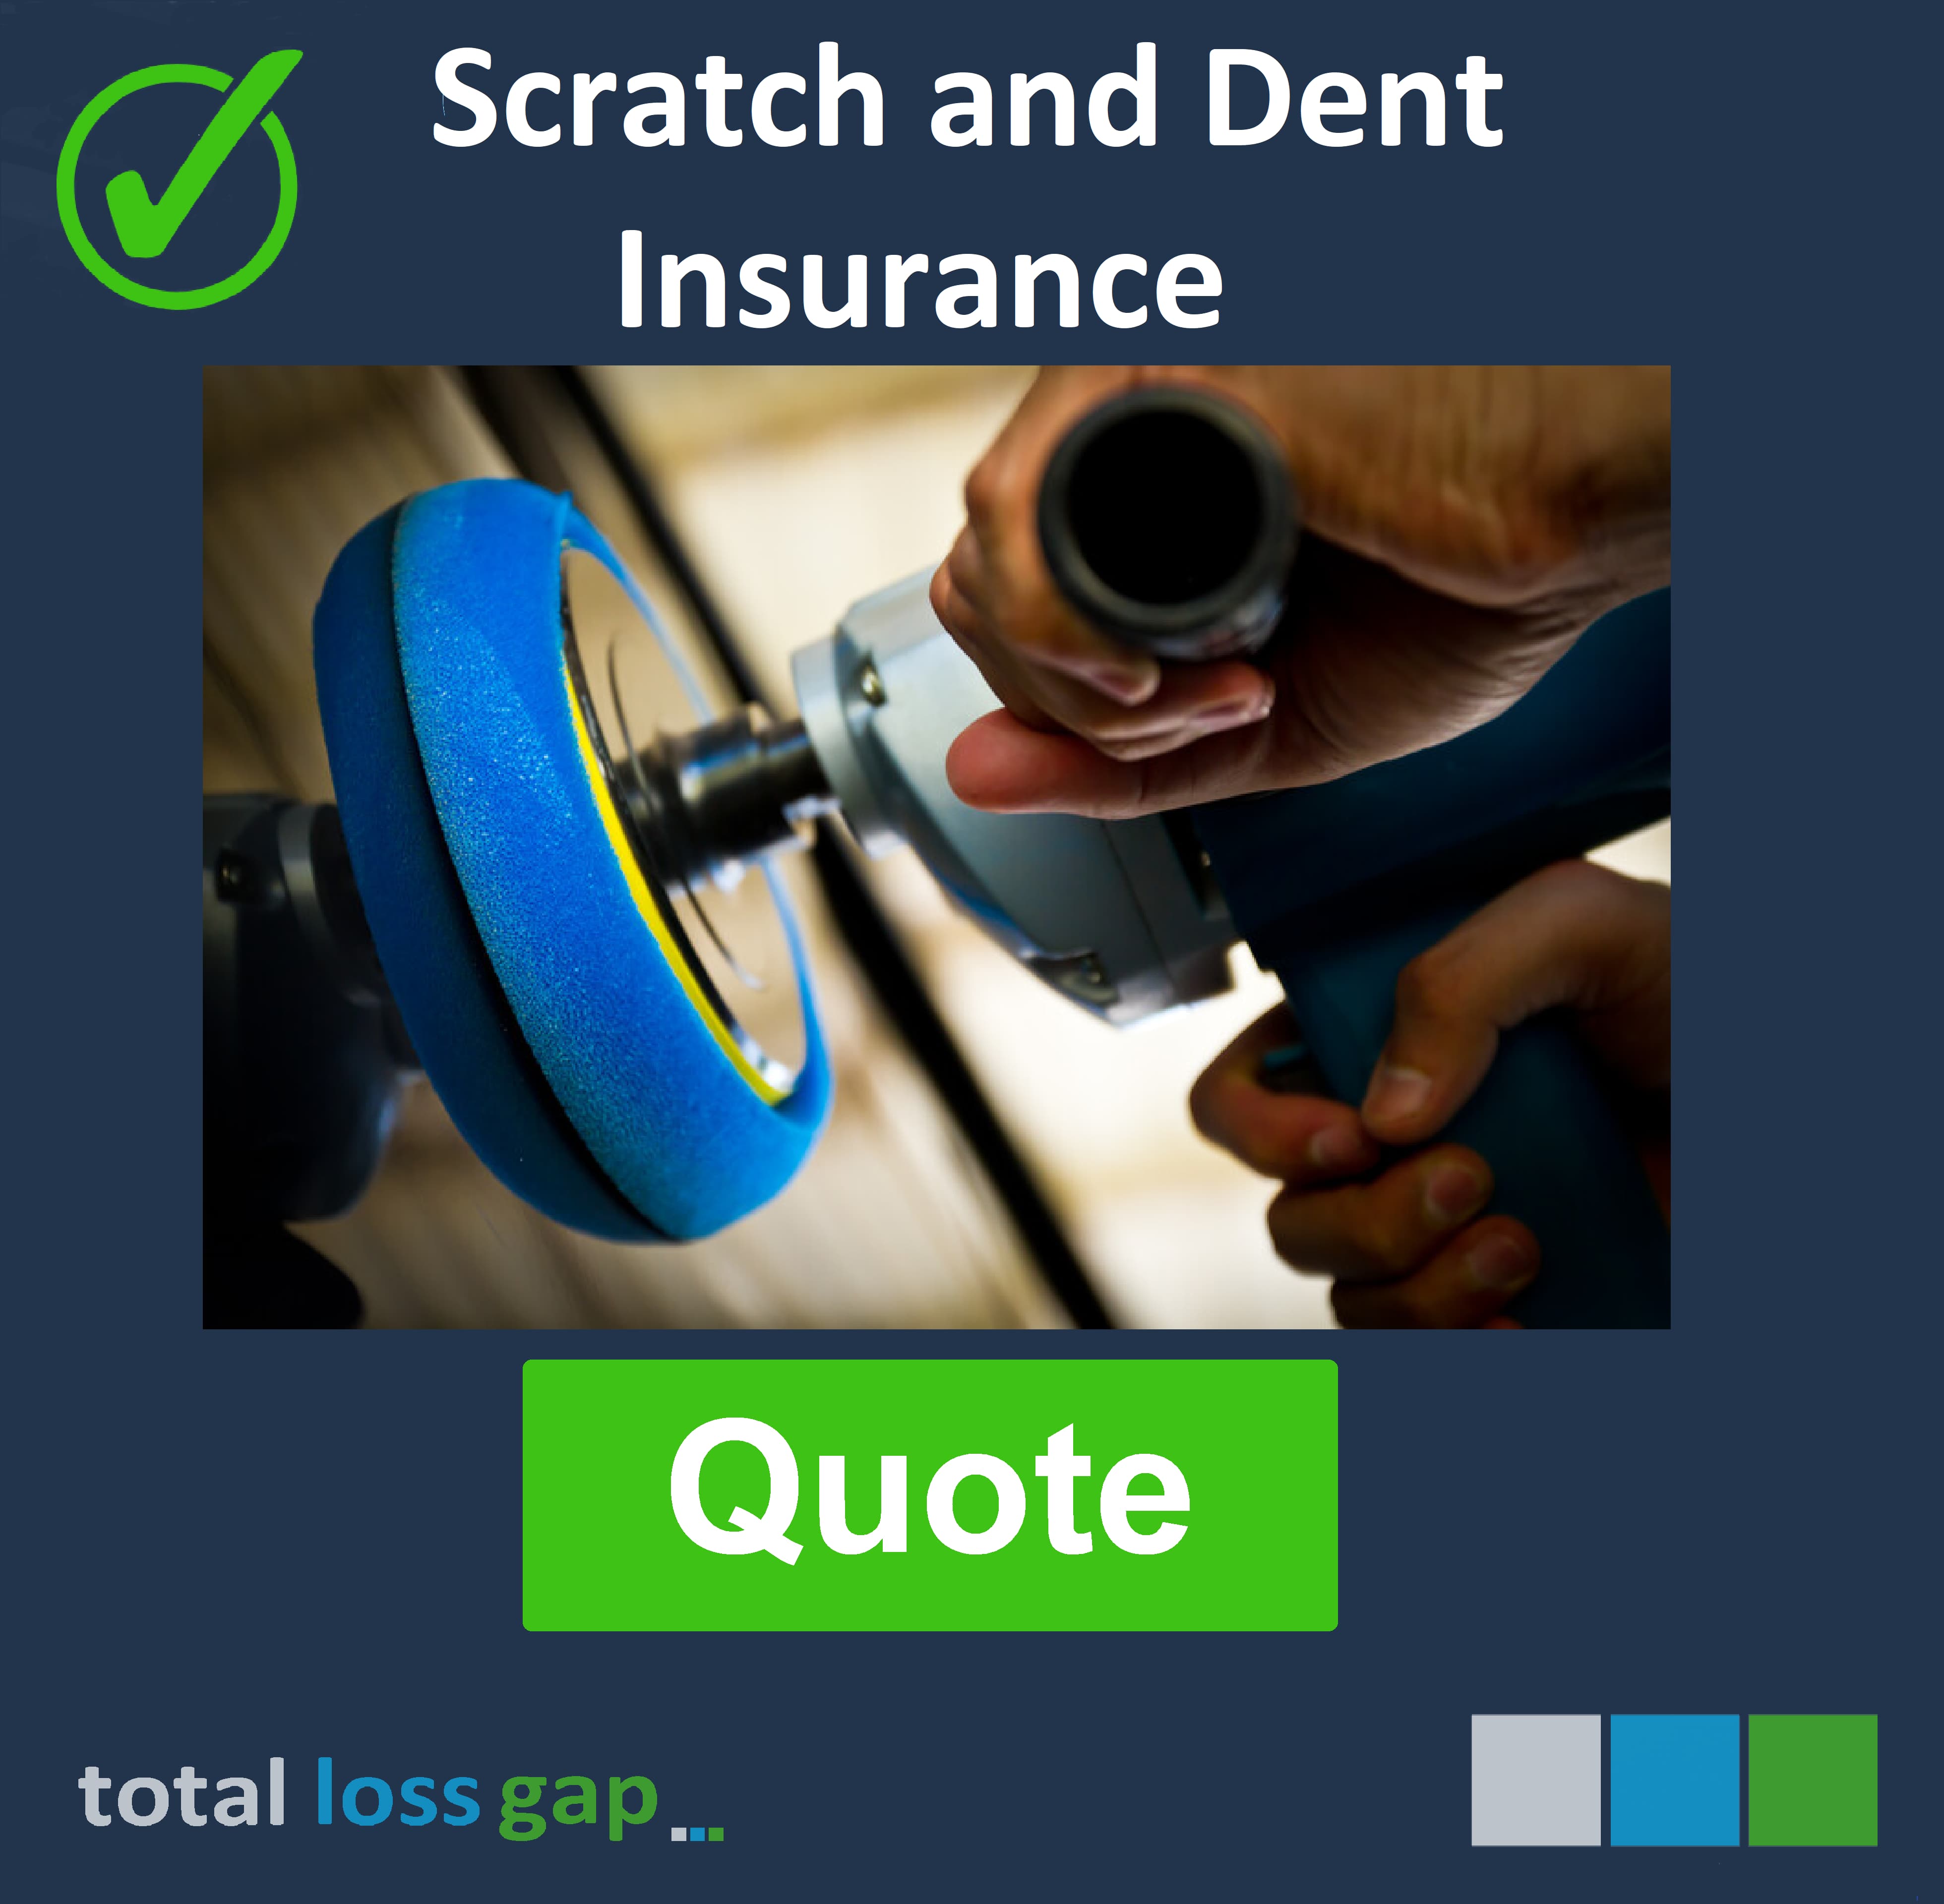 Scratch and Dent insurance for your EV